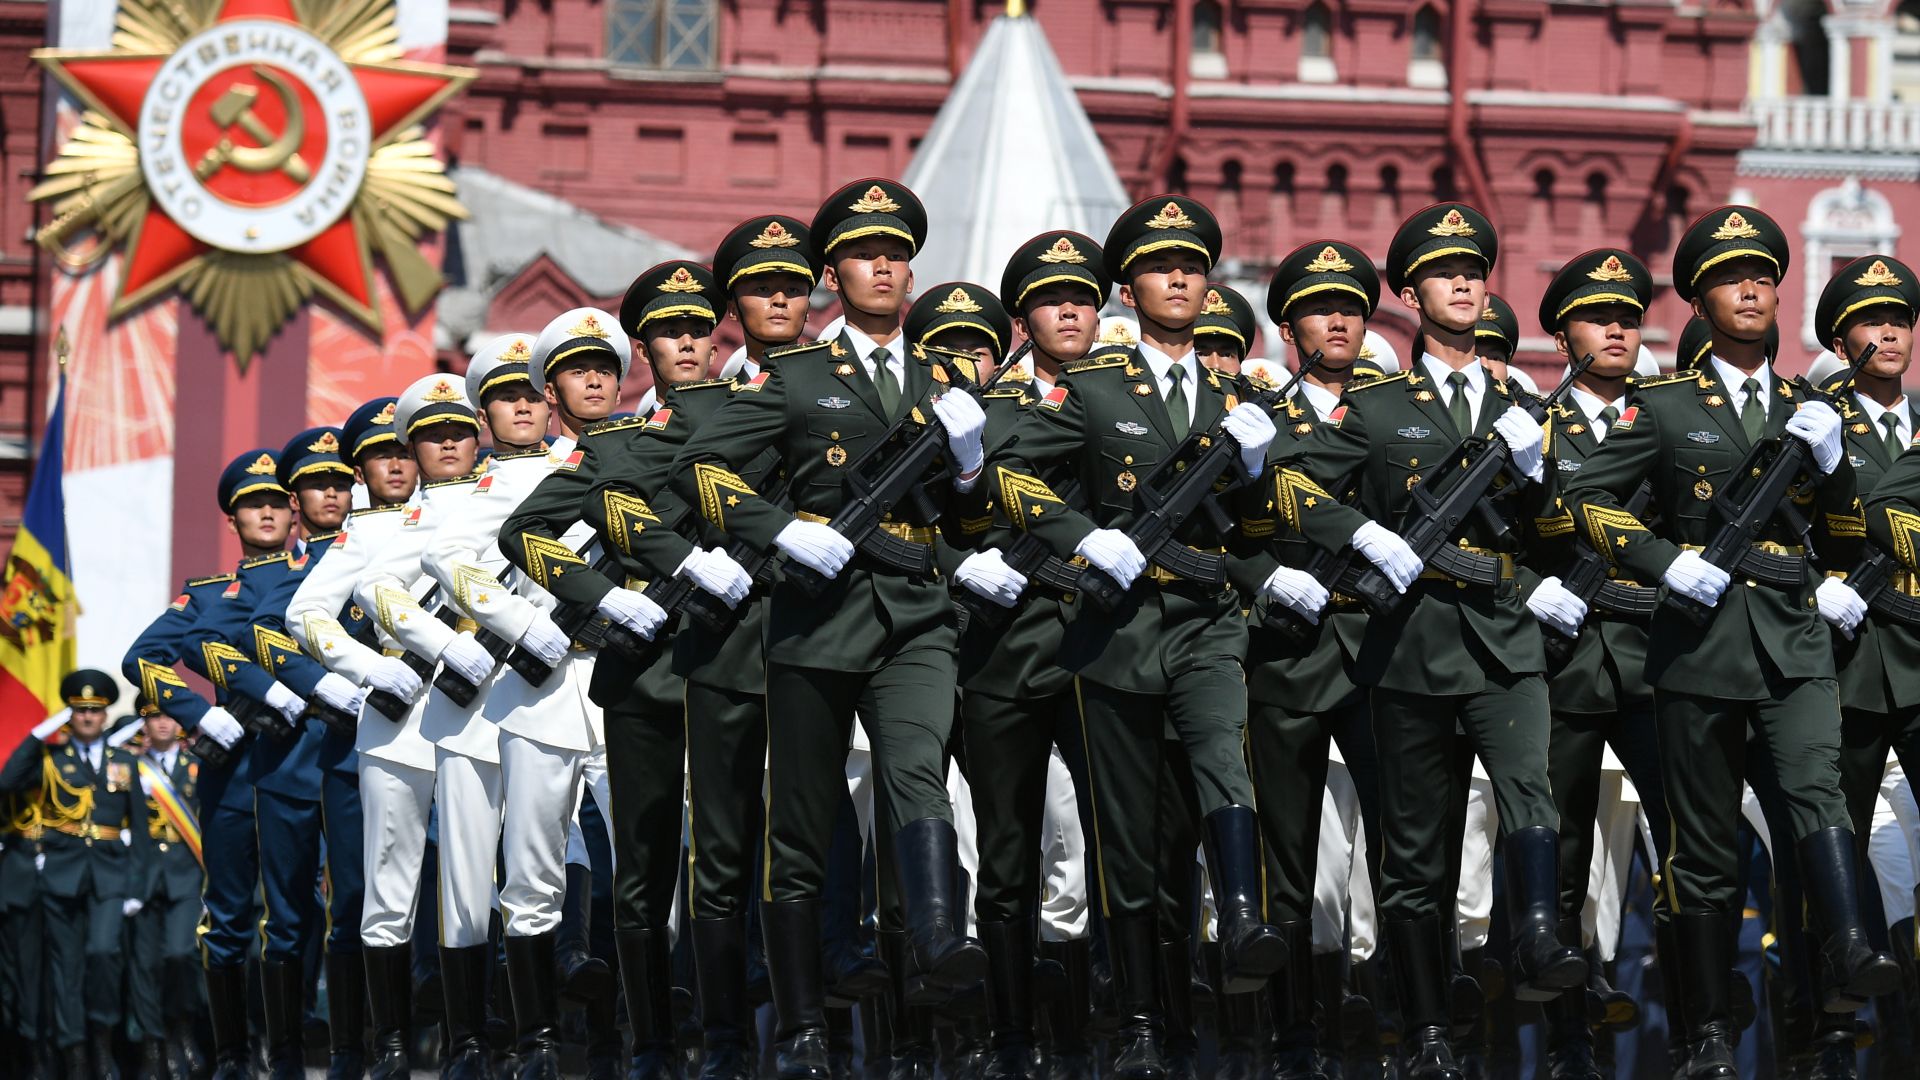 Soldiers of China's People's Liberation Army march during the Victory Day Parade in Red Square in Moscow, Russia, June 24, 2020. The military parade, marking the 75th anniversary of the victory over Nazi Germany in World War Two, was scheduled for May 9 but postponed due to the outbreak of the coronavirus disease (COVID-19). Host photo agency/Ramil Sitdikov via REUTERS